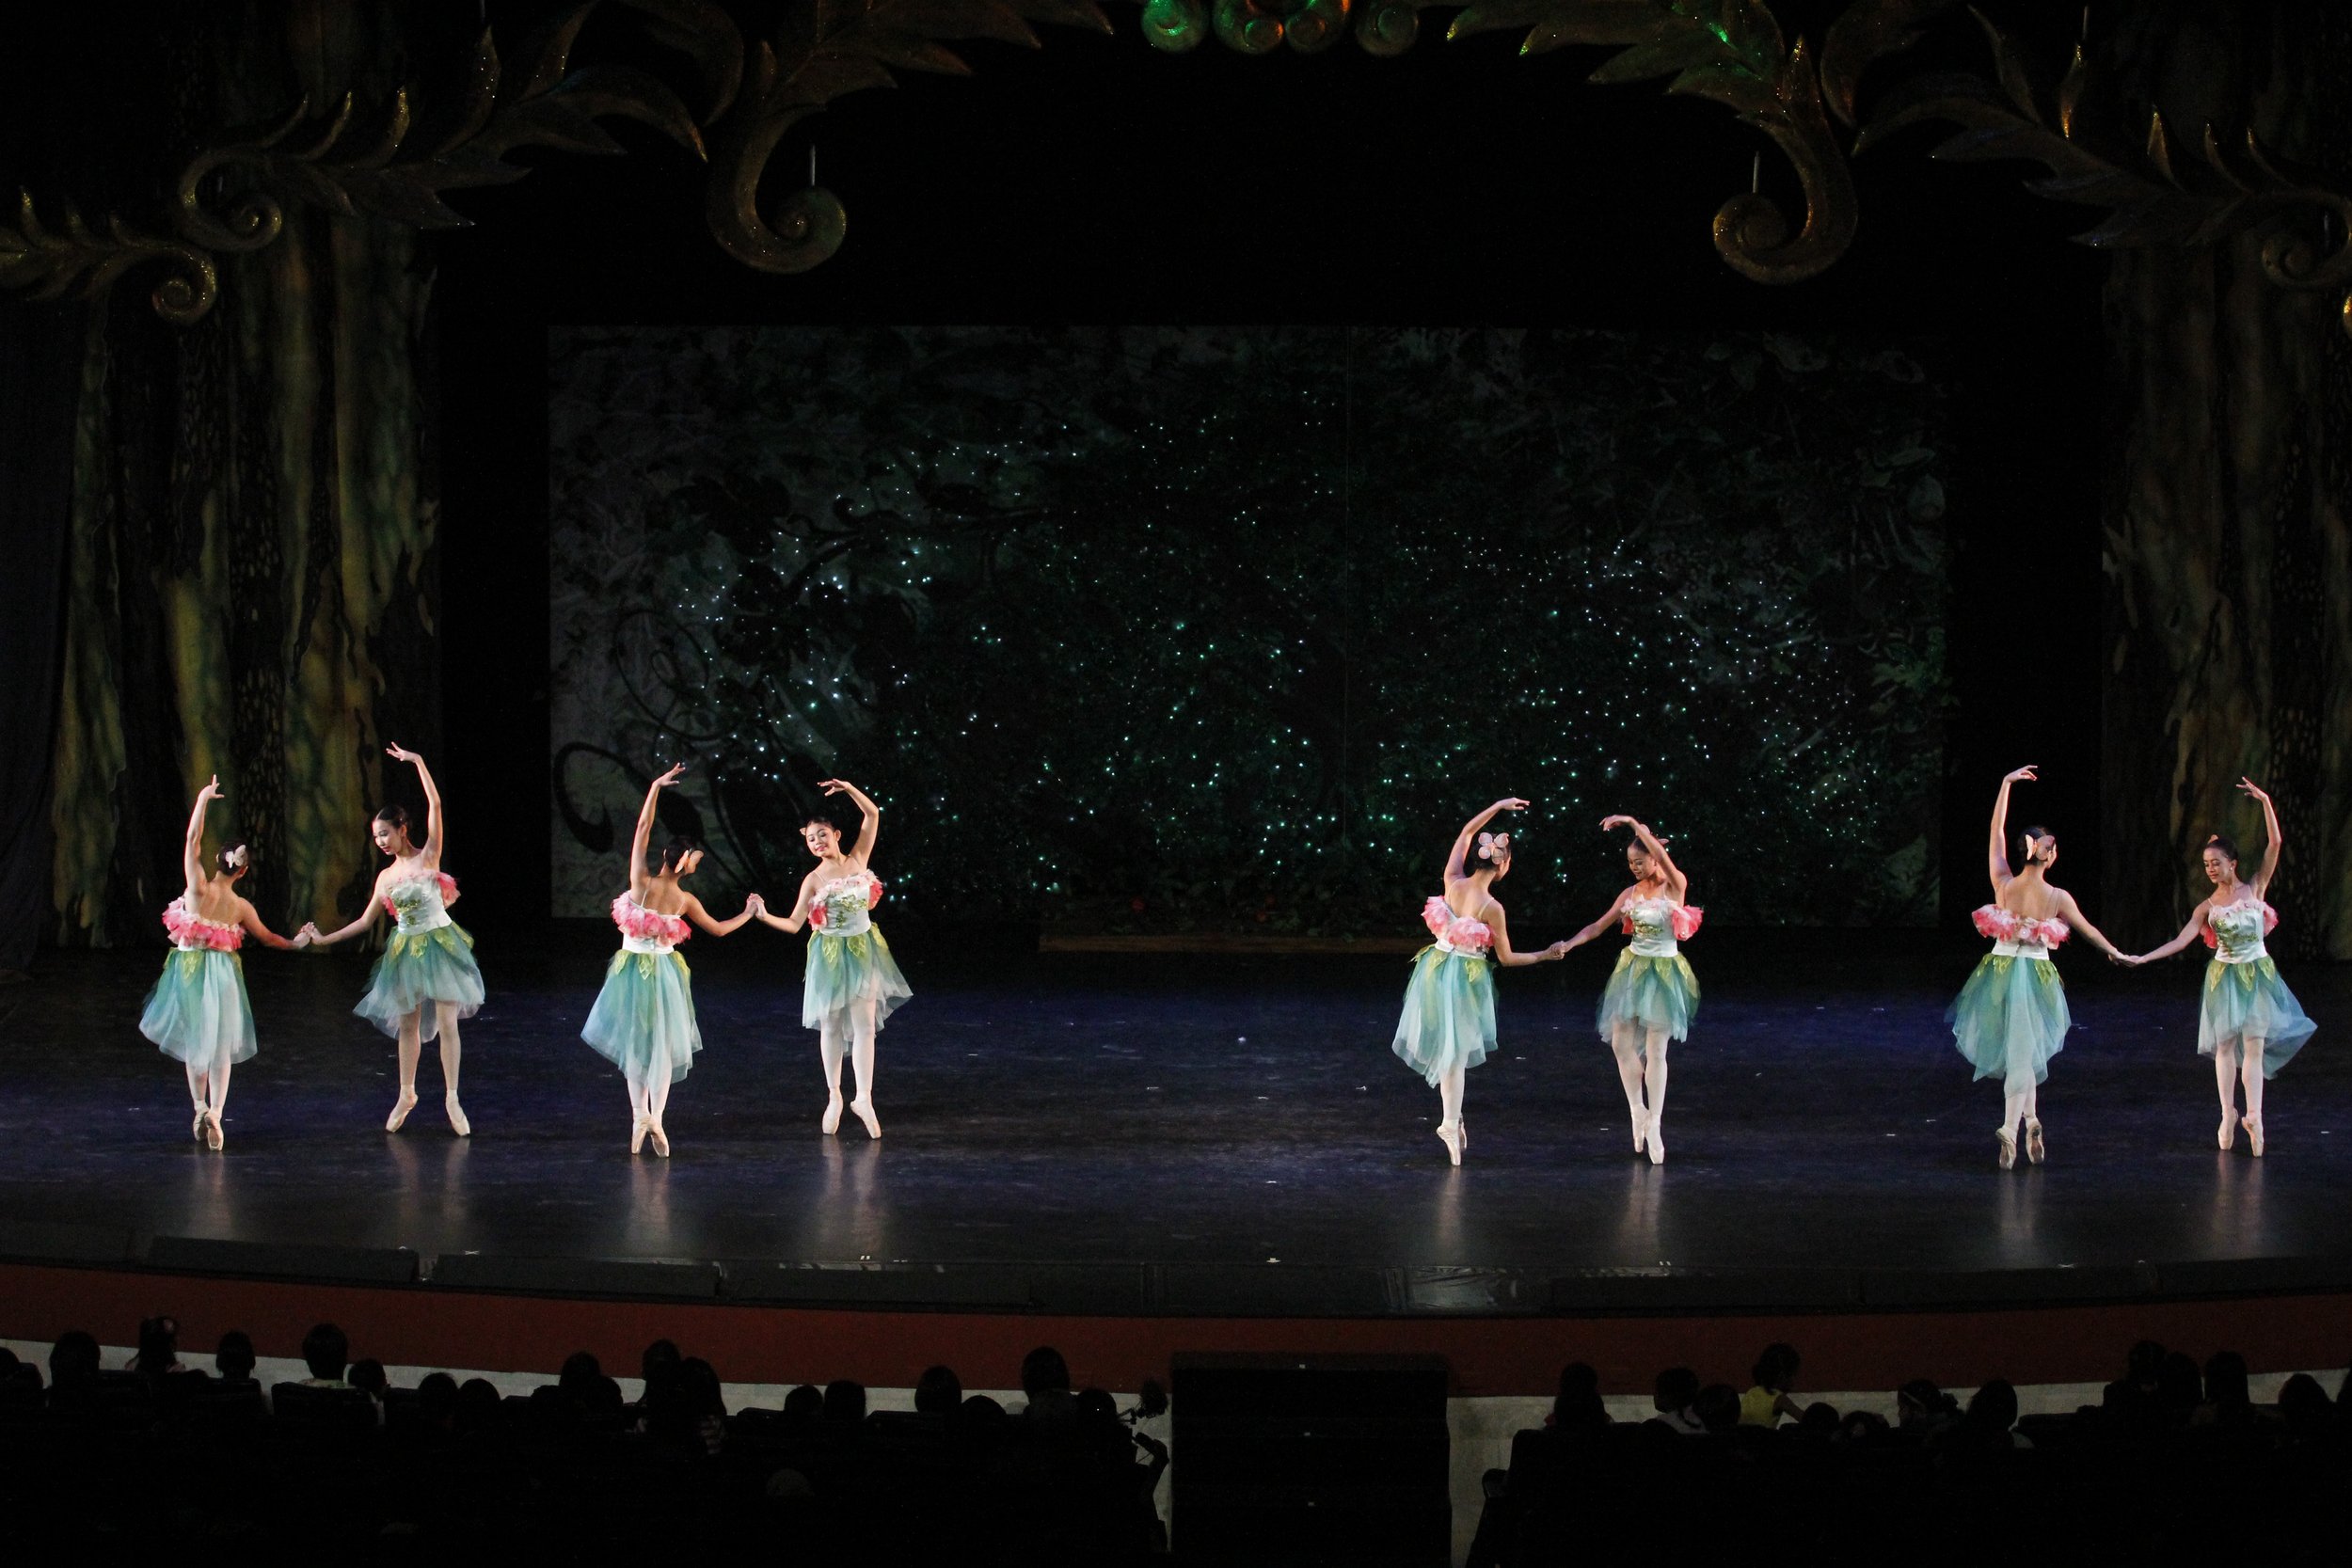    The tutus of the Garden Spirits in Hazel Sabas-Gower’s  Sinderela  (2012) are fittingly inspired by the colors of nature. Their predominantly green-colored tutus are spruced up with peach floral accents on their bodice and in their hair ornaments 